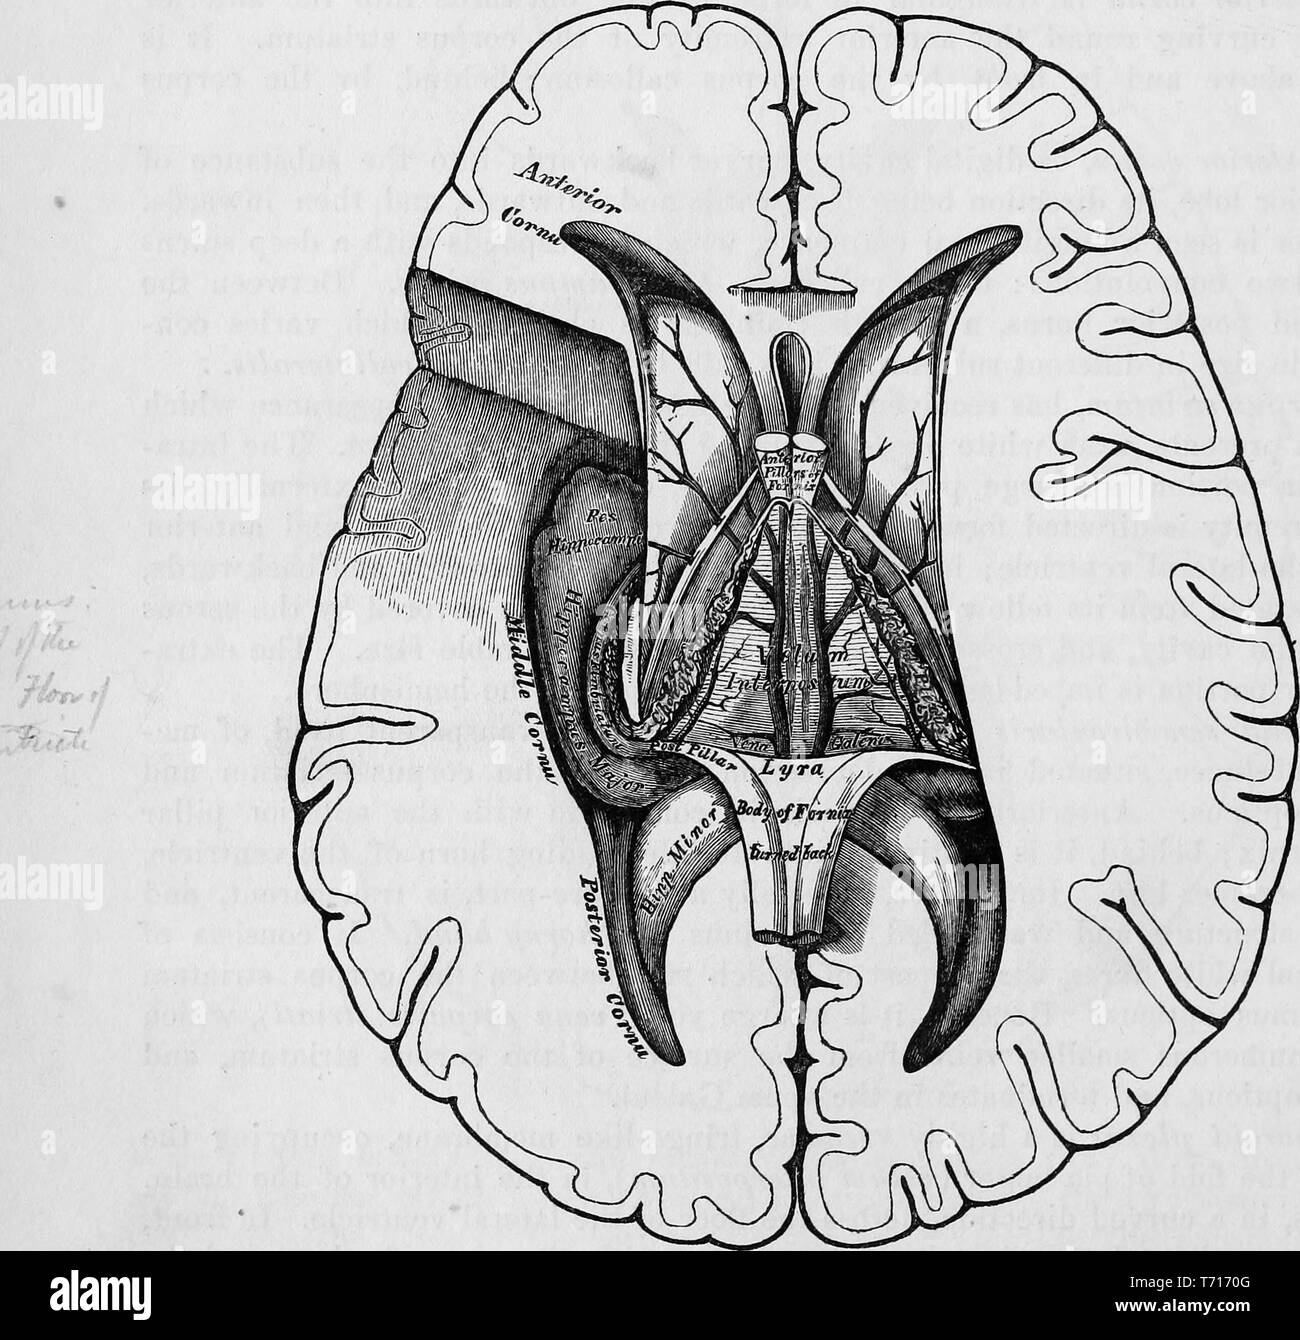 Illustration of the brain section anatomy, from the book 'Anatomy, descriptive and surgical' by Henry Gray, Henry Vandyke Carter, and John Guise Westmacott, 1860. Courtesy Internet Archive. () Stock Photo